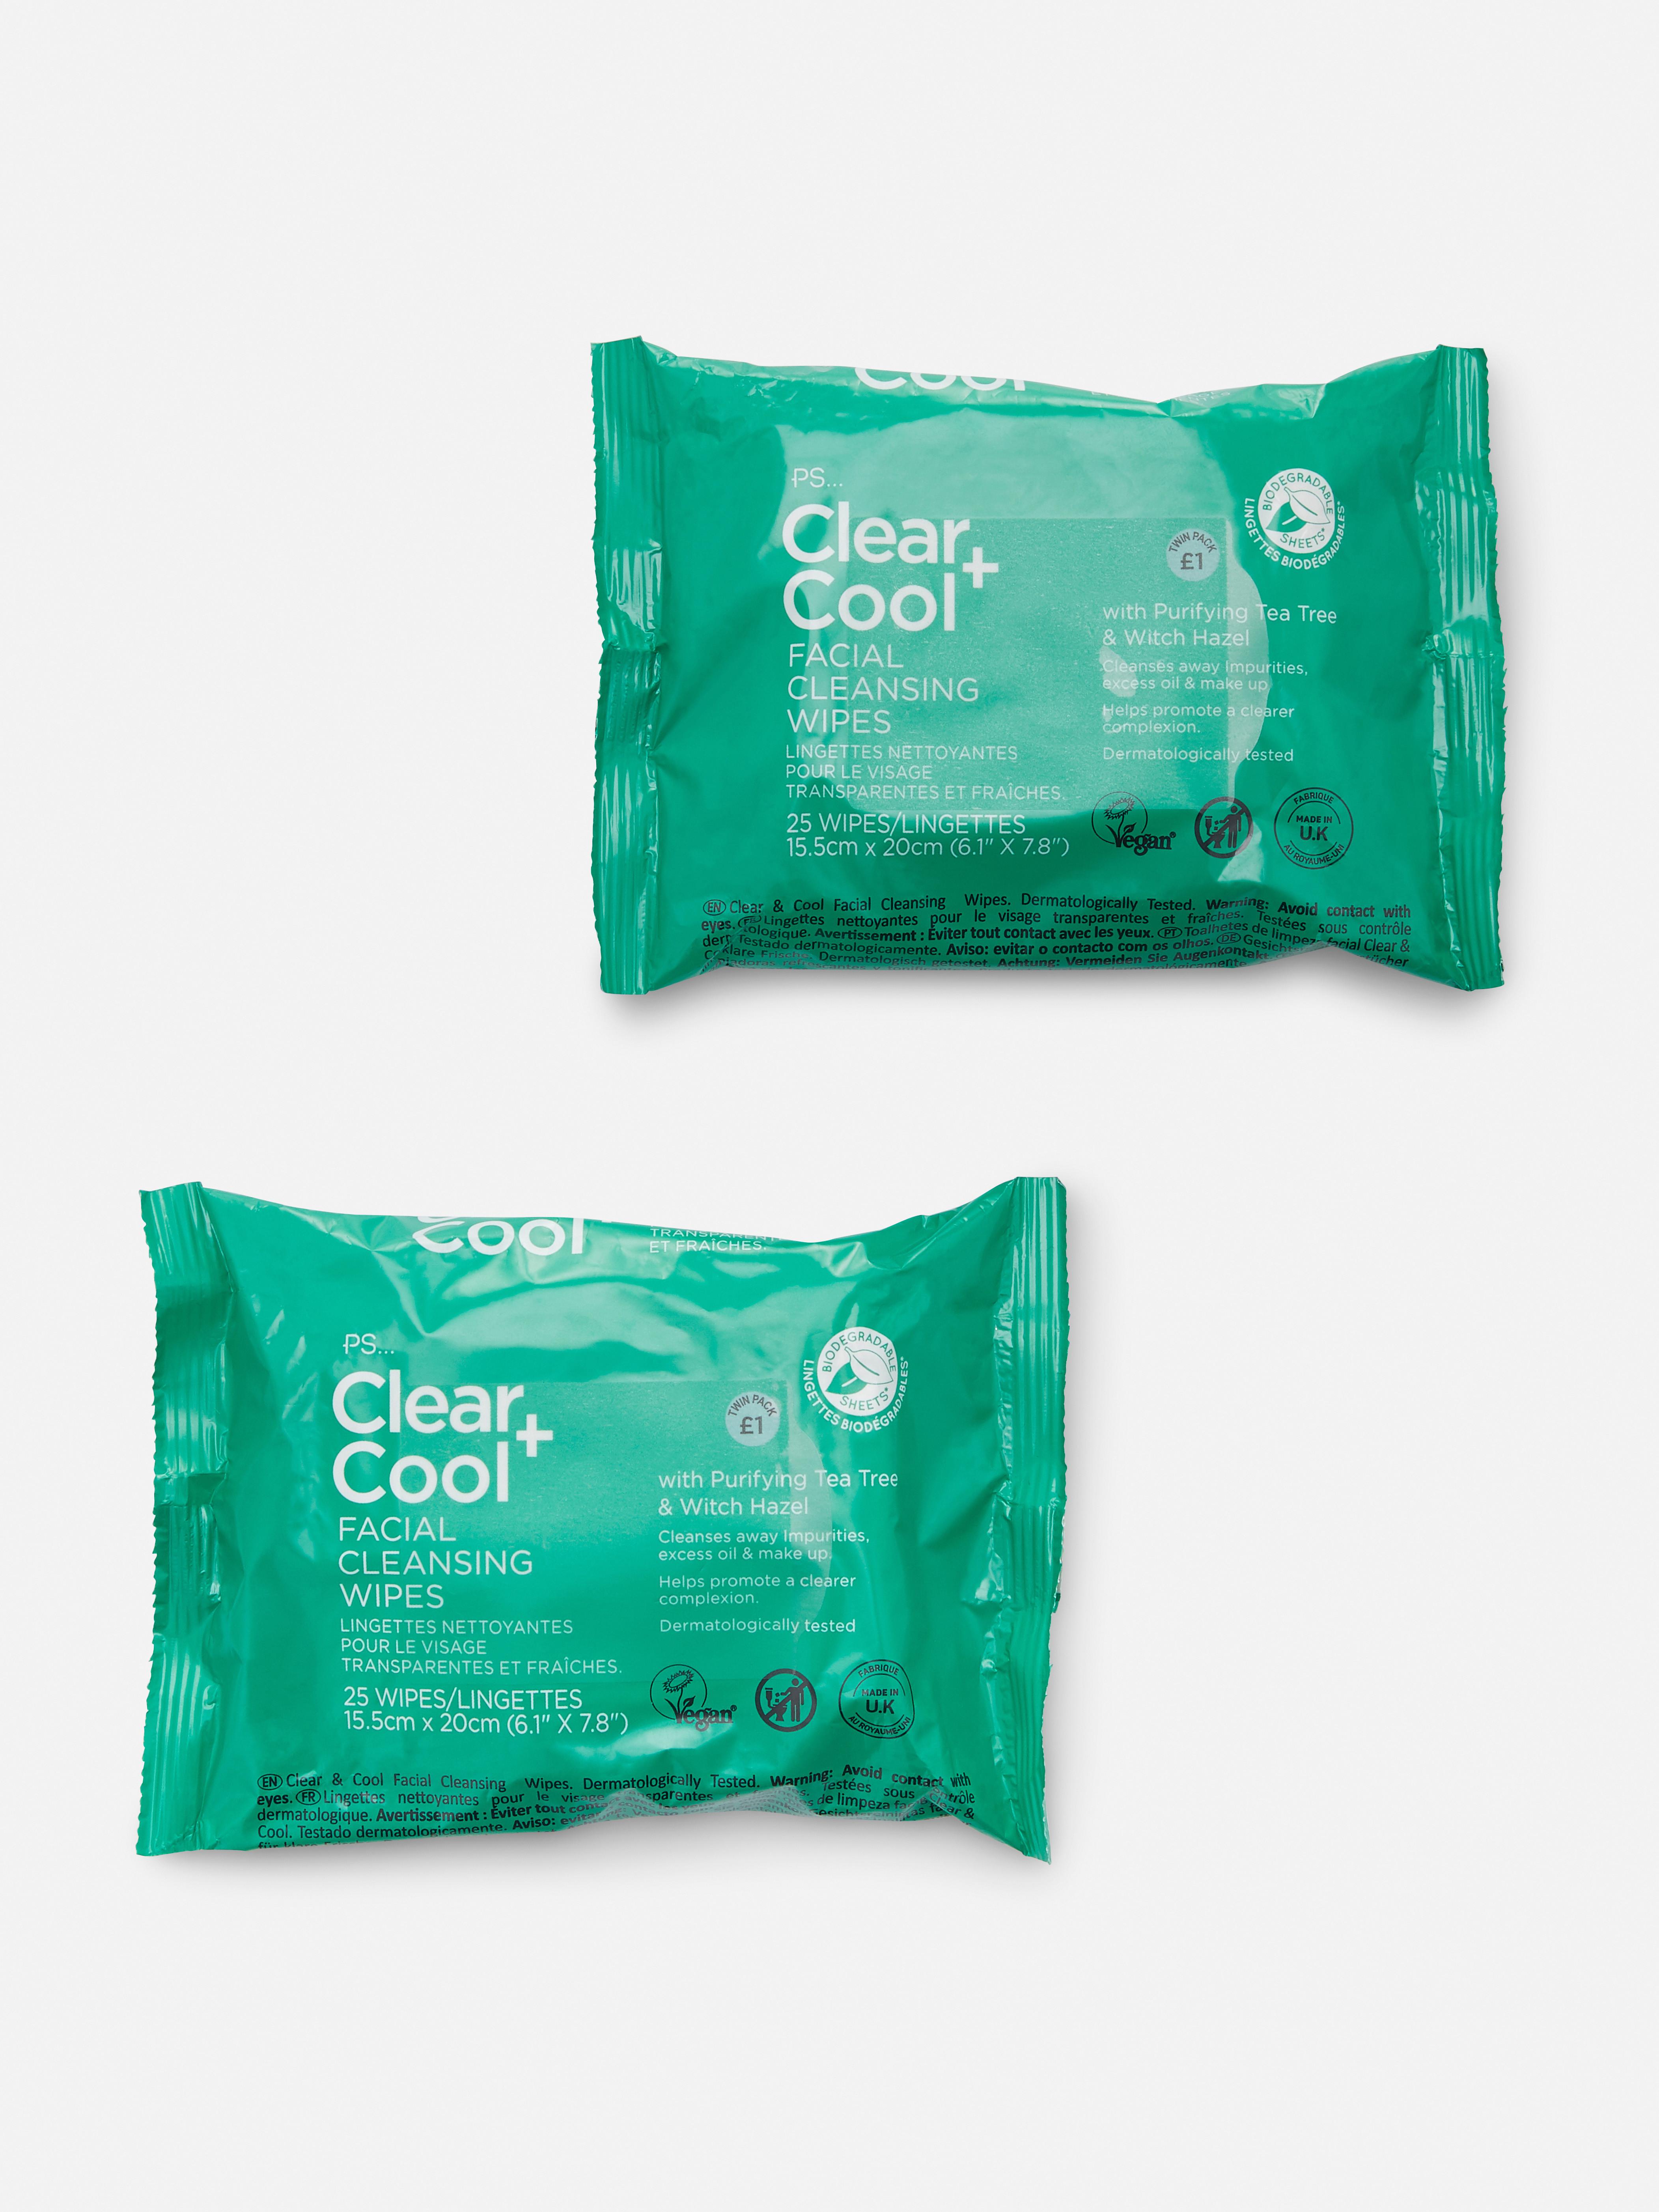 PS... Bio Clear and Cool Facial Cleansing Wipes